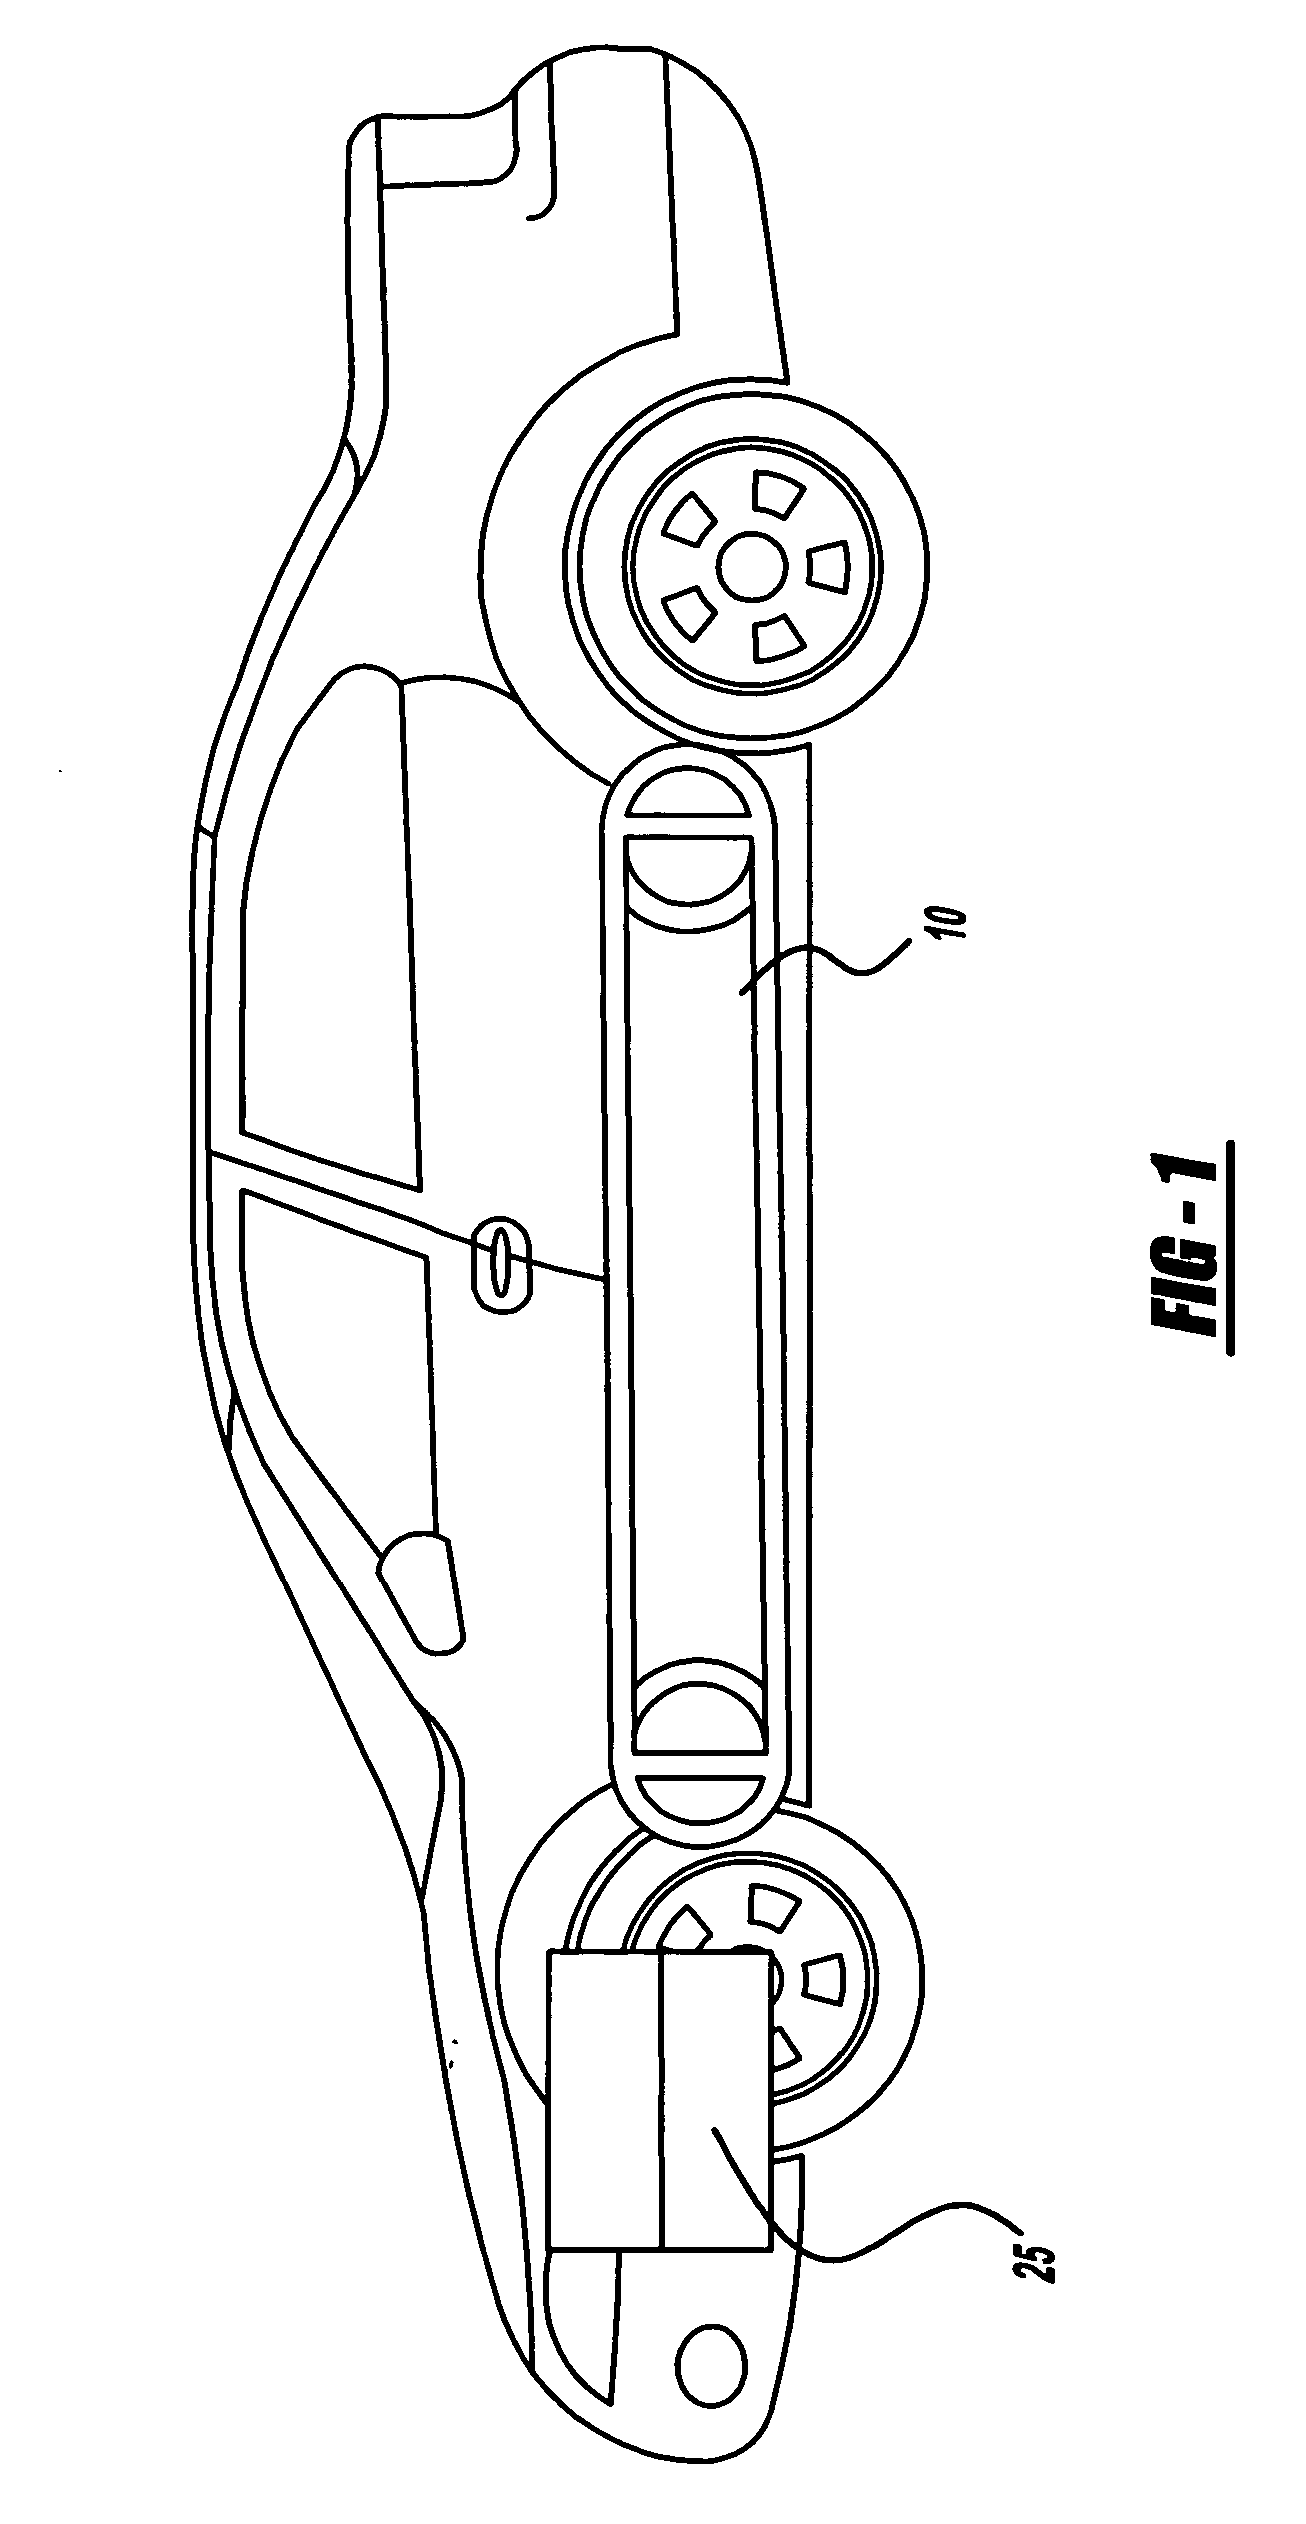 Vehicle frame with integrated high pressure fuel tank